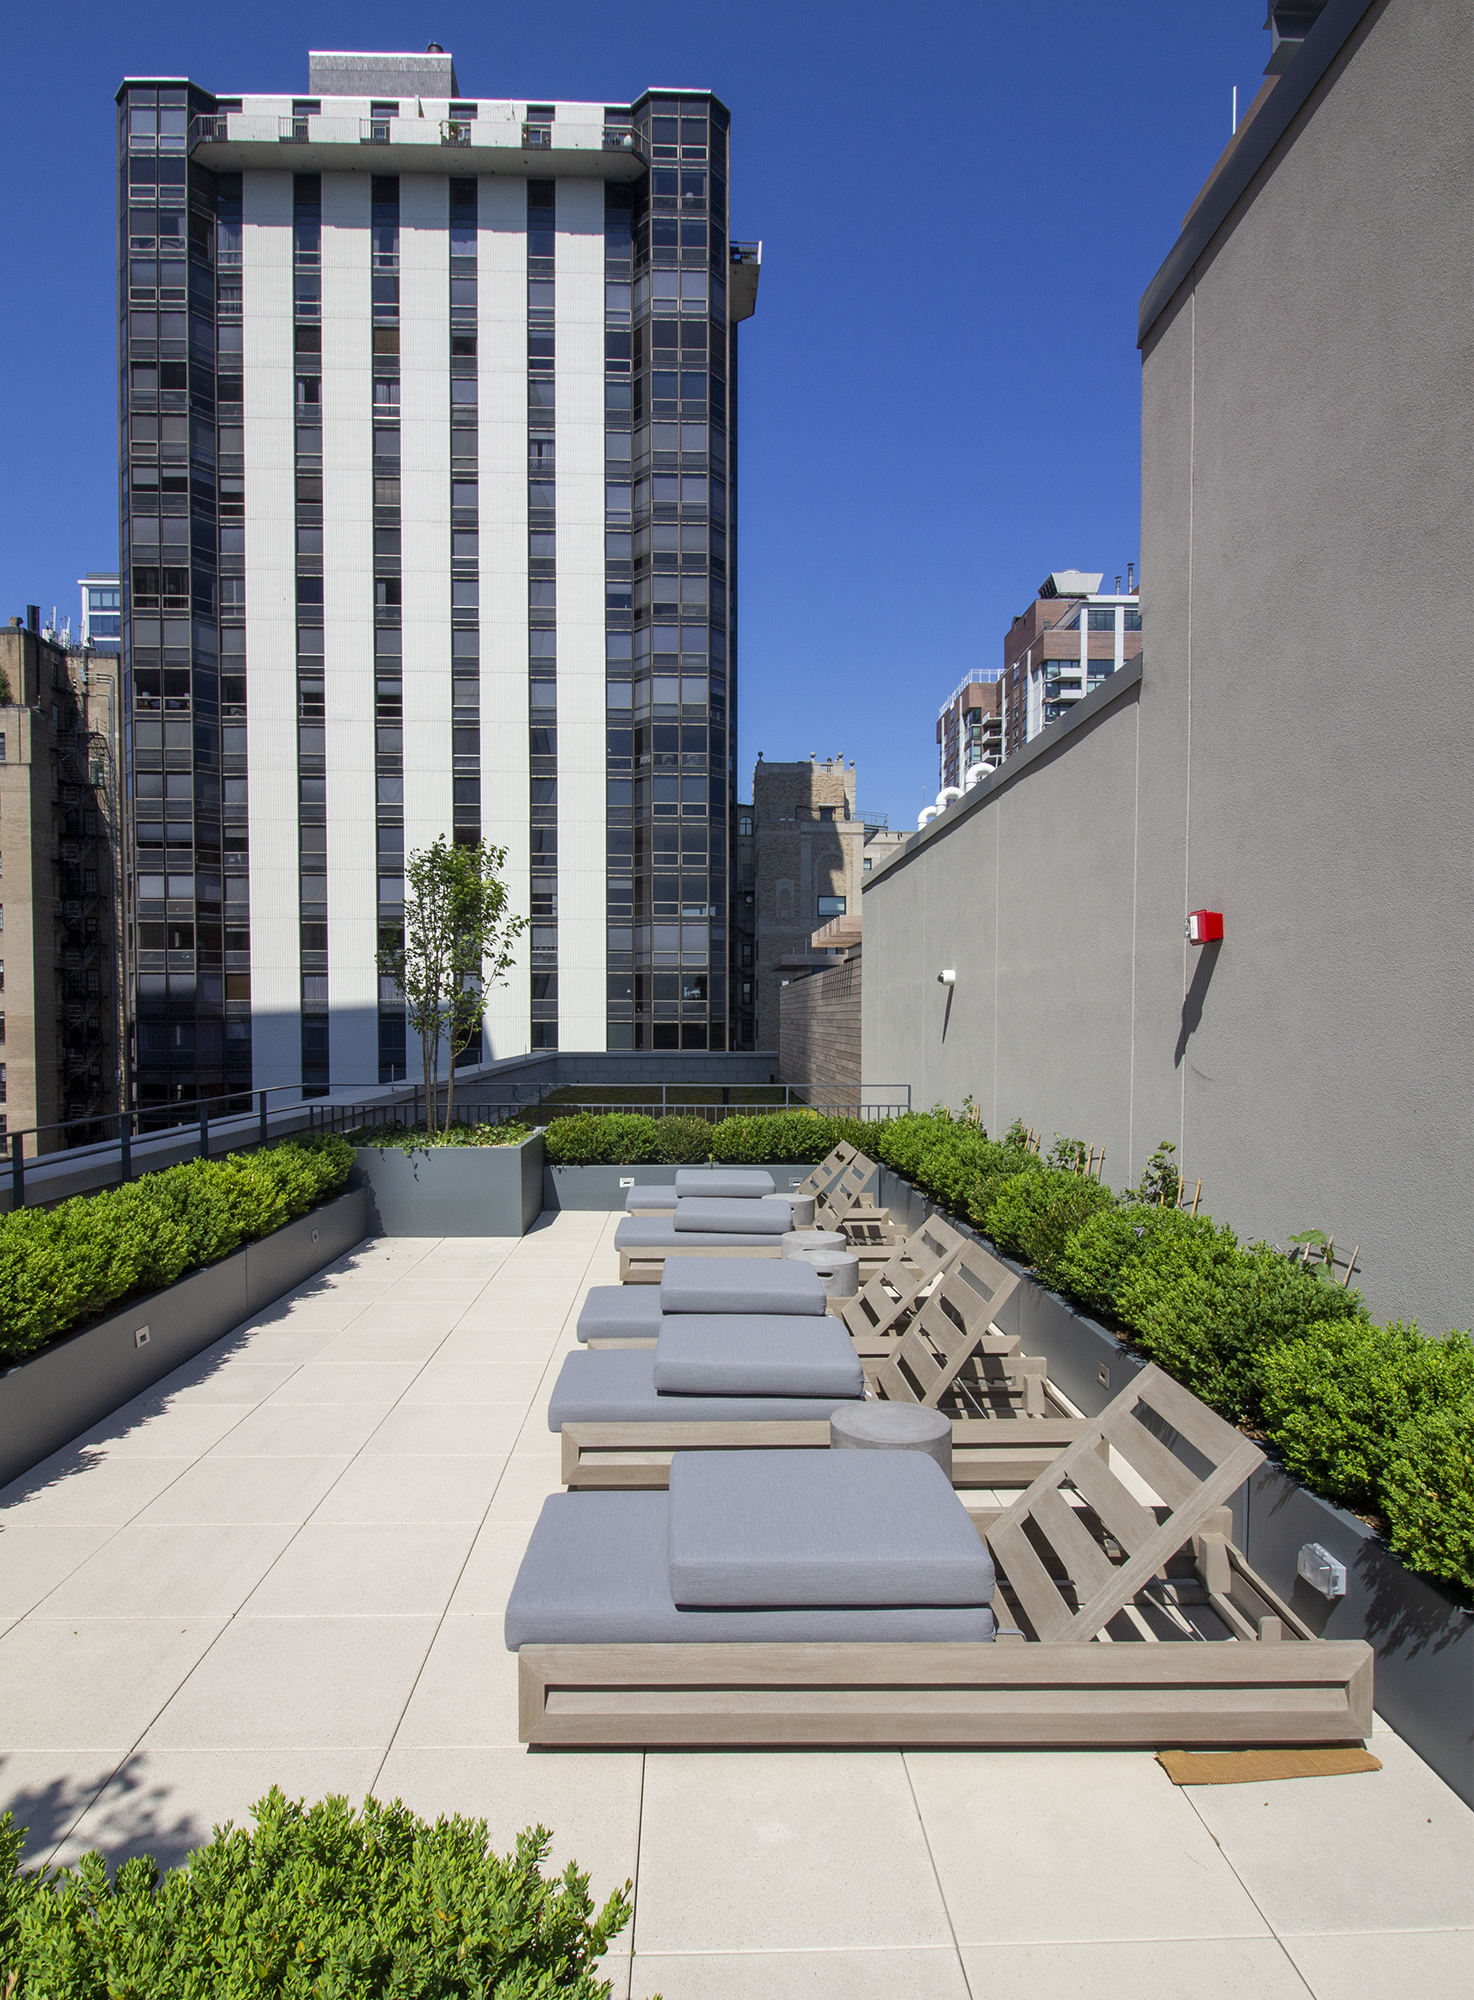 Seating areas and raised gardens on a roof deck made of Unilock Arcana slabs are backed by a wall, and look out onto the Chicago skyline.